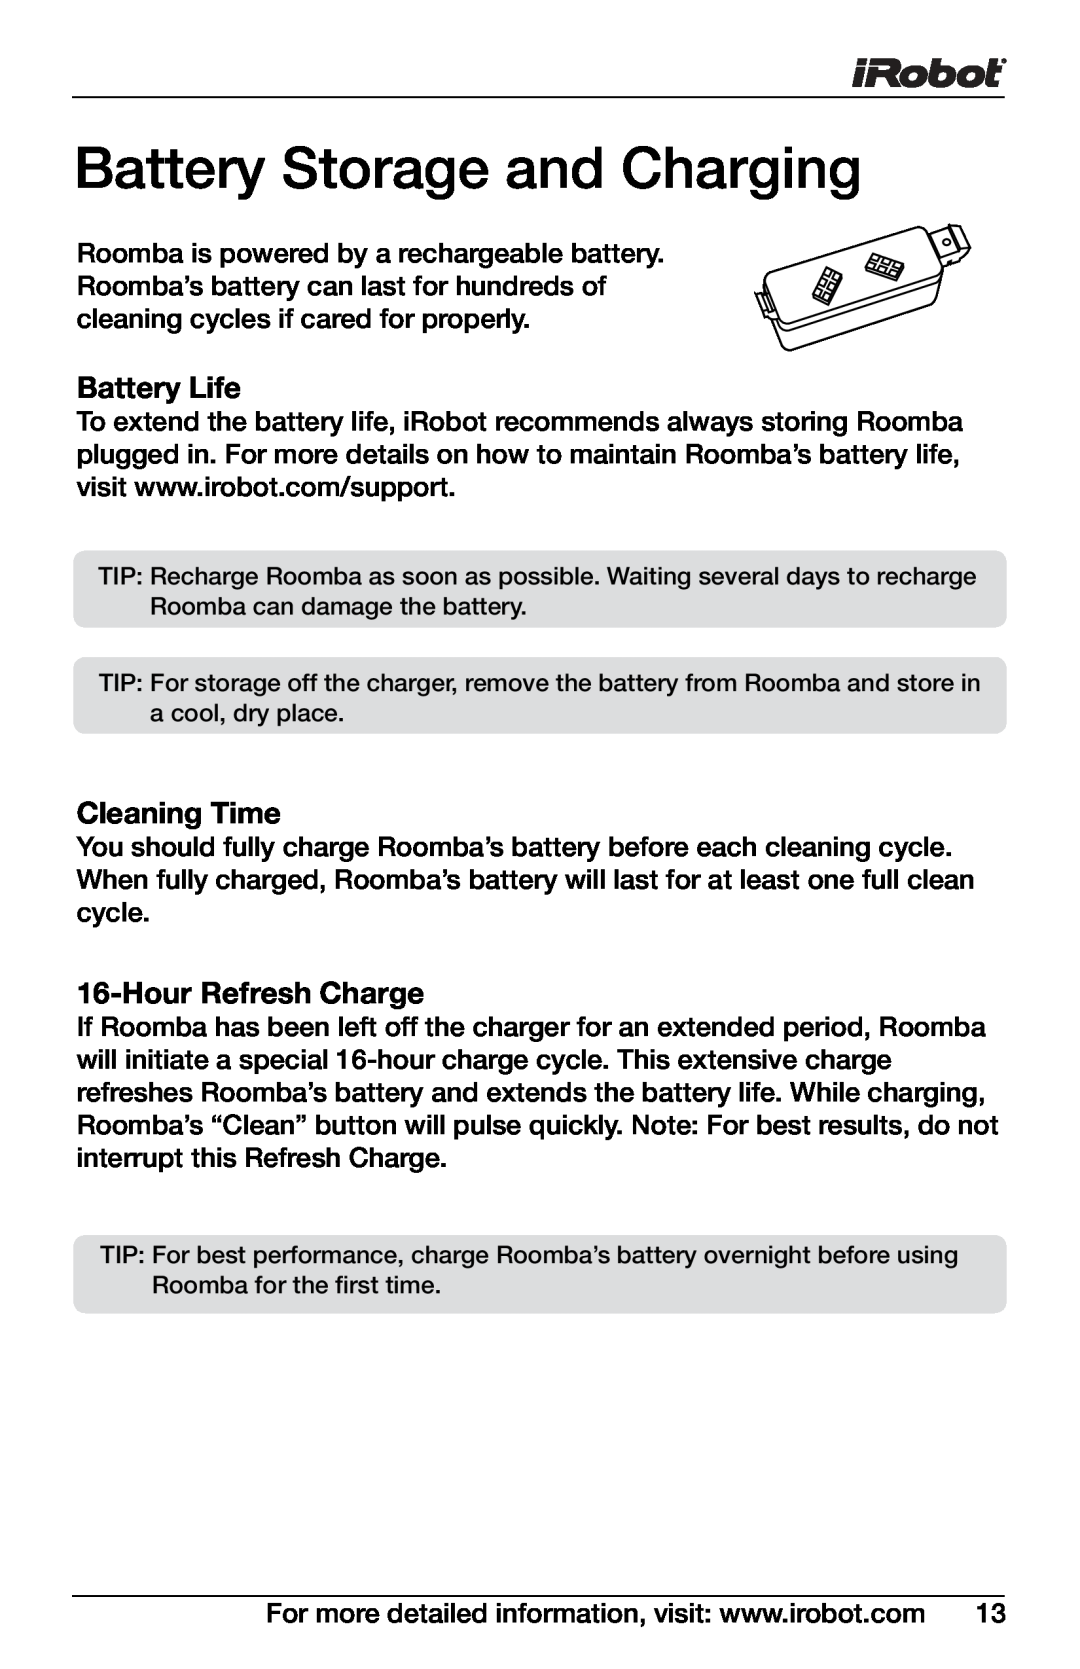 iRobot 4150, 400 owner manual Battery Storage and Charging, Battery Life, Cleaning Time, HourRefresh Charge 